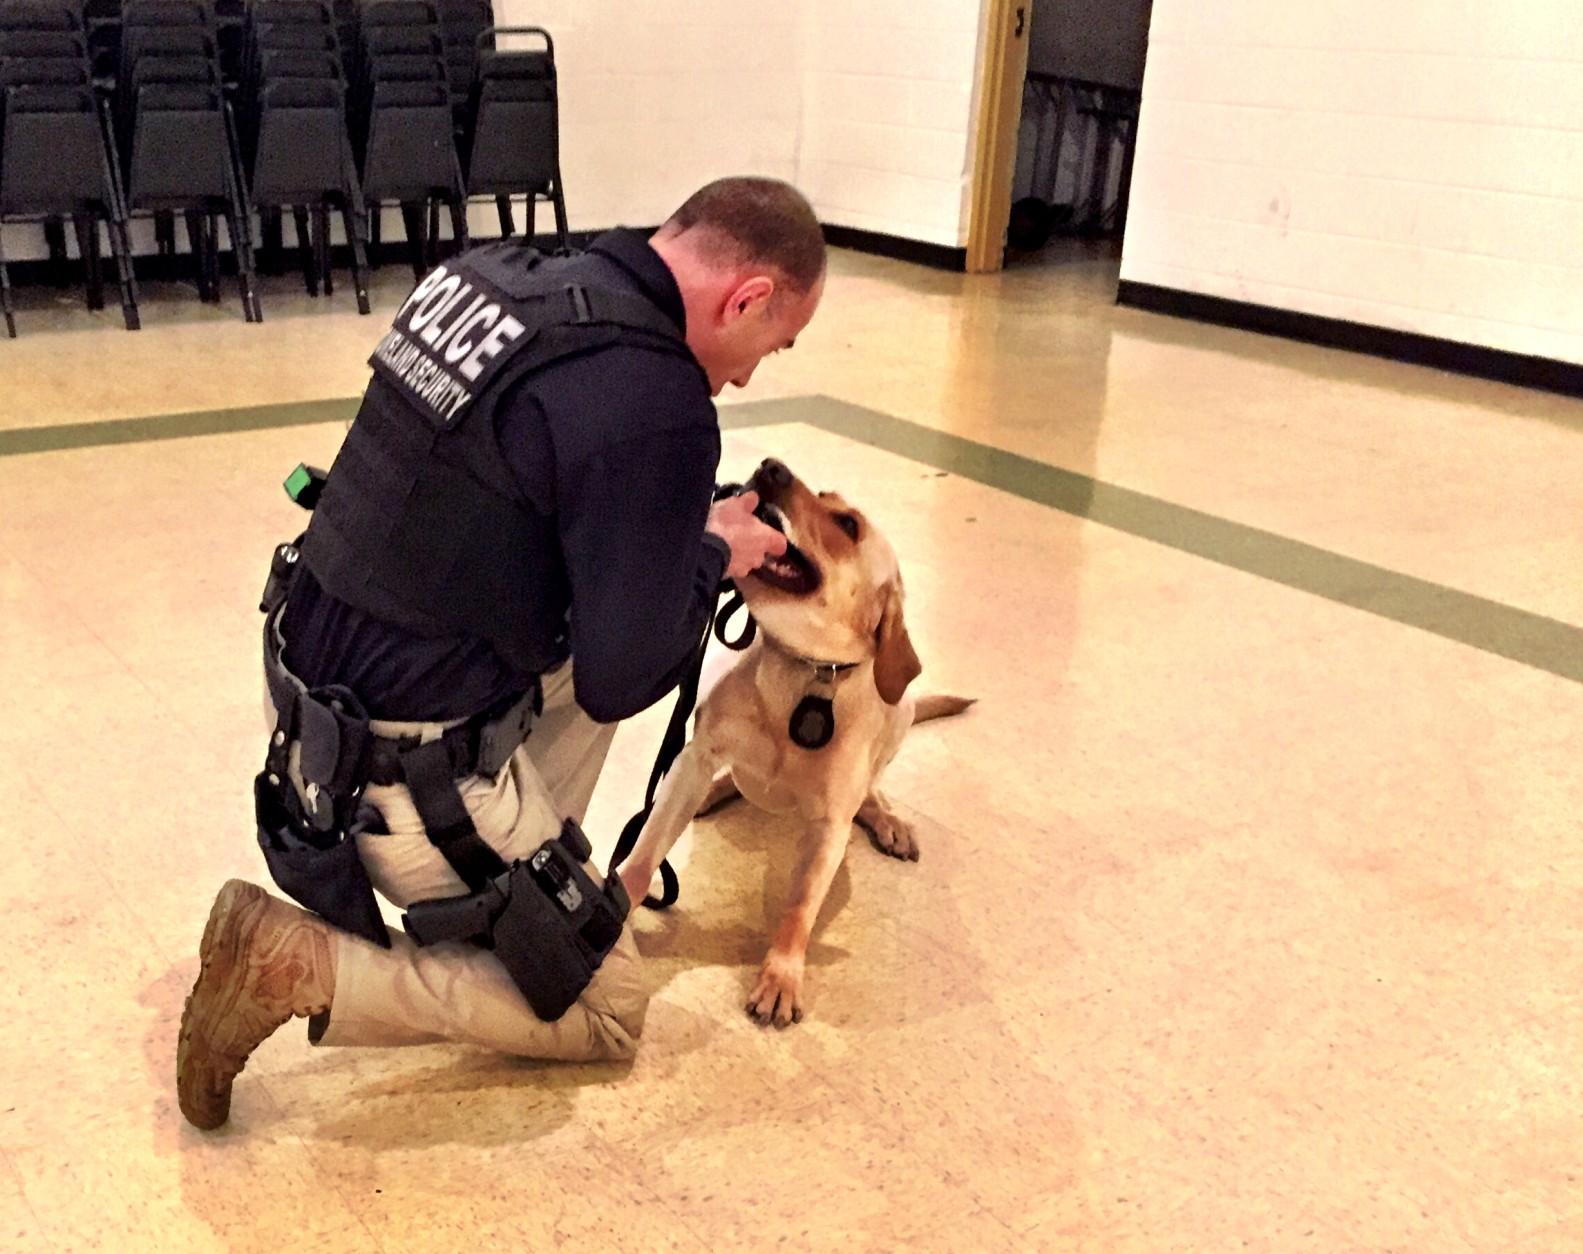 Bomb sniffing dogs from federal, state, and local agencies are being trained by Bureau of Alcohol, Tobacco, Firearms and Explosives, in Fairfax. (WTOP/Neal Augenstein)